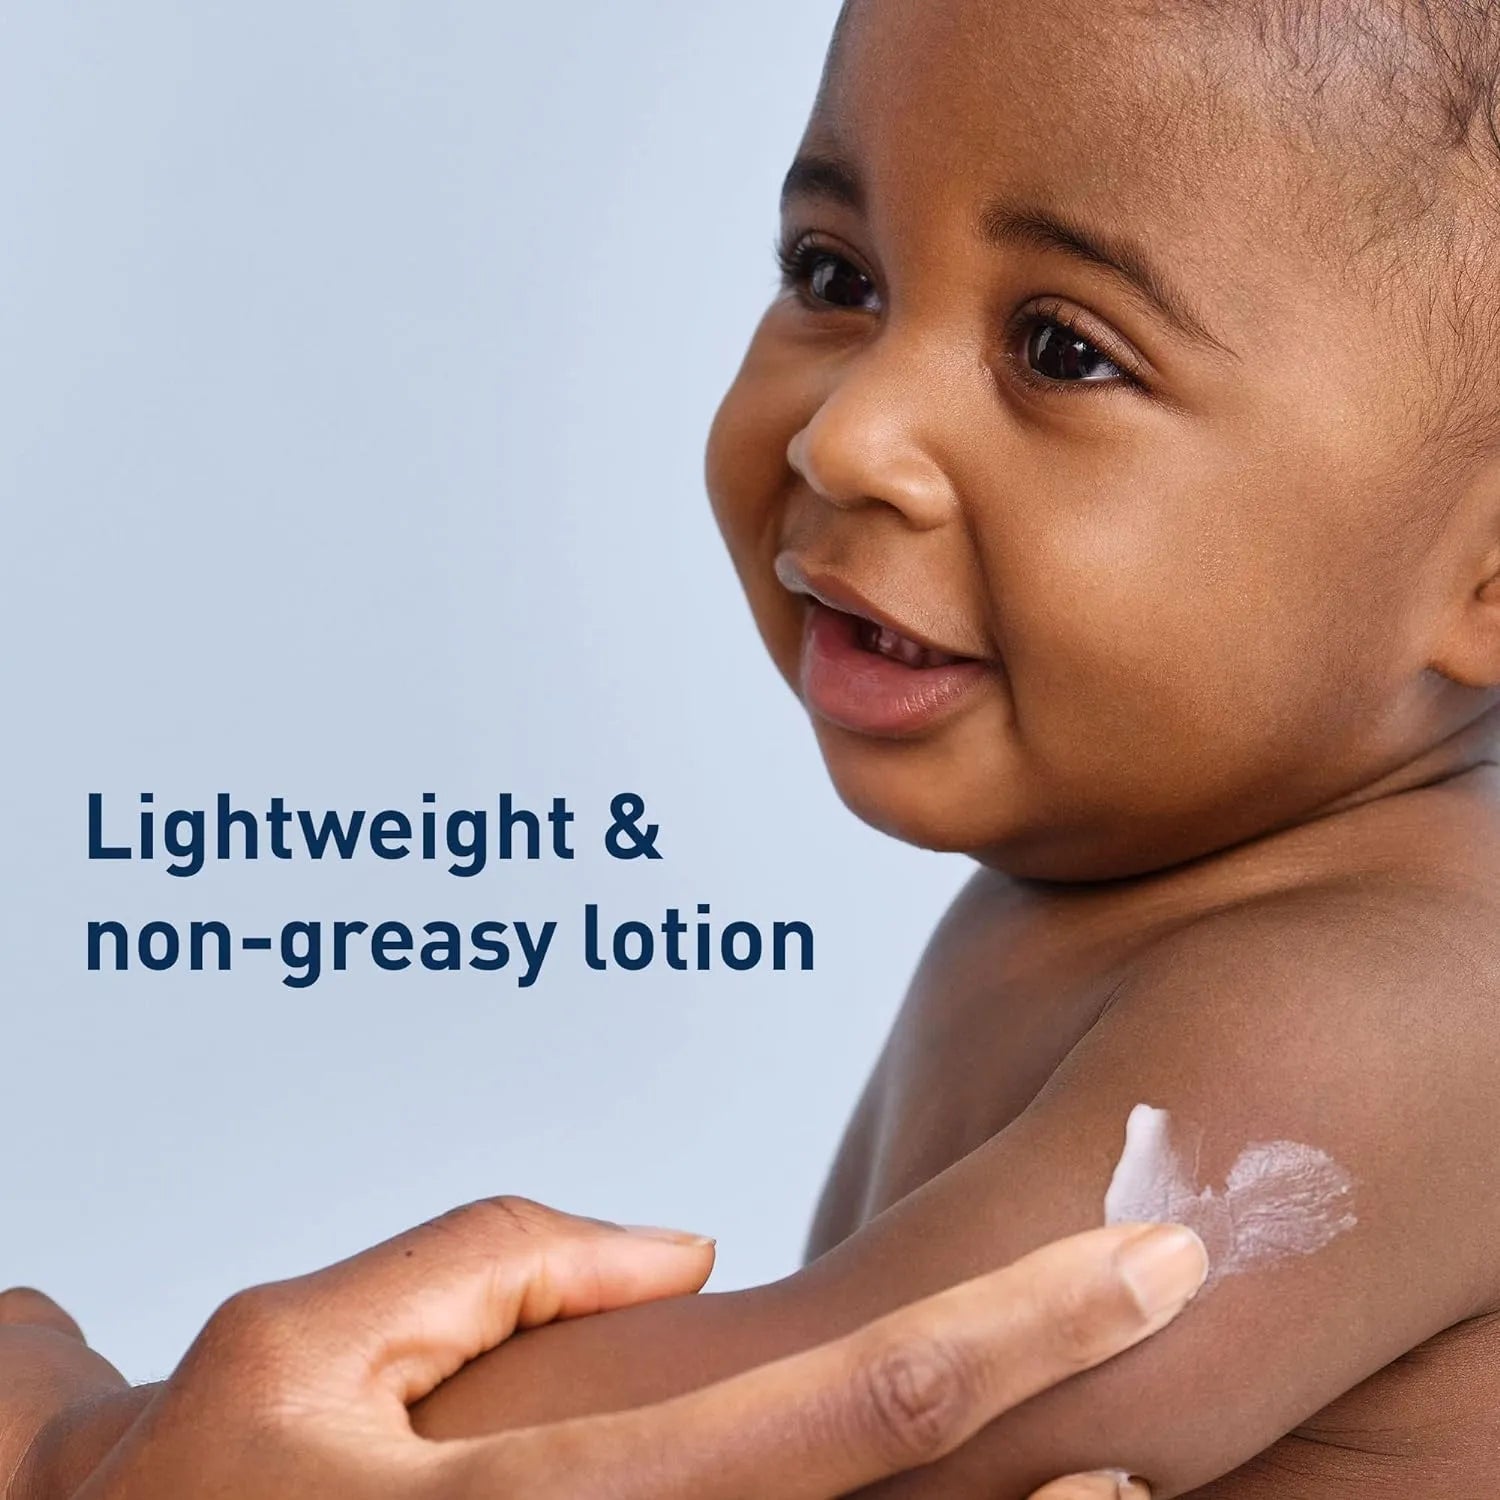 CeraVe Baby Moisturizing Lotion 237ml - Gentle Care for Delicate Skin Safe for everyday use, this dermatologist-developed lotion keeps baby's skin soft & healthy. Hydrates & protects baby's delicate skin with ceramides & hyaluronic acid.